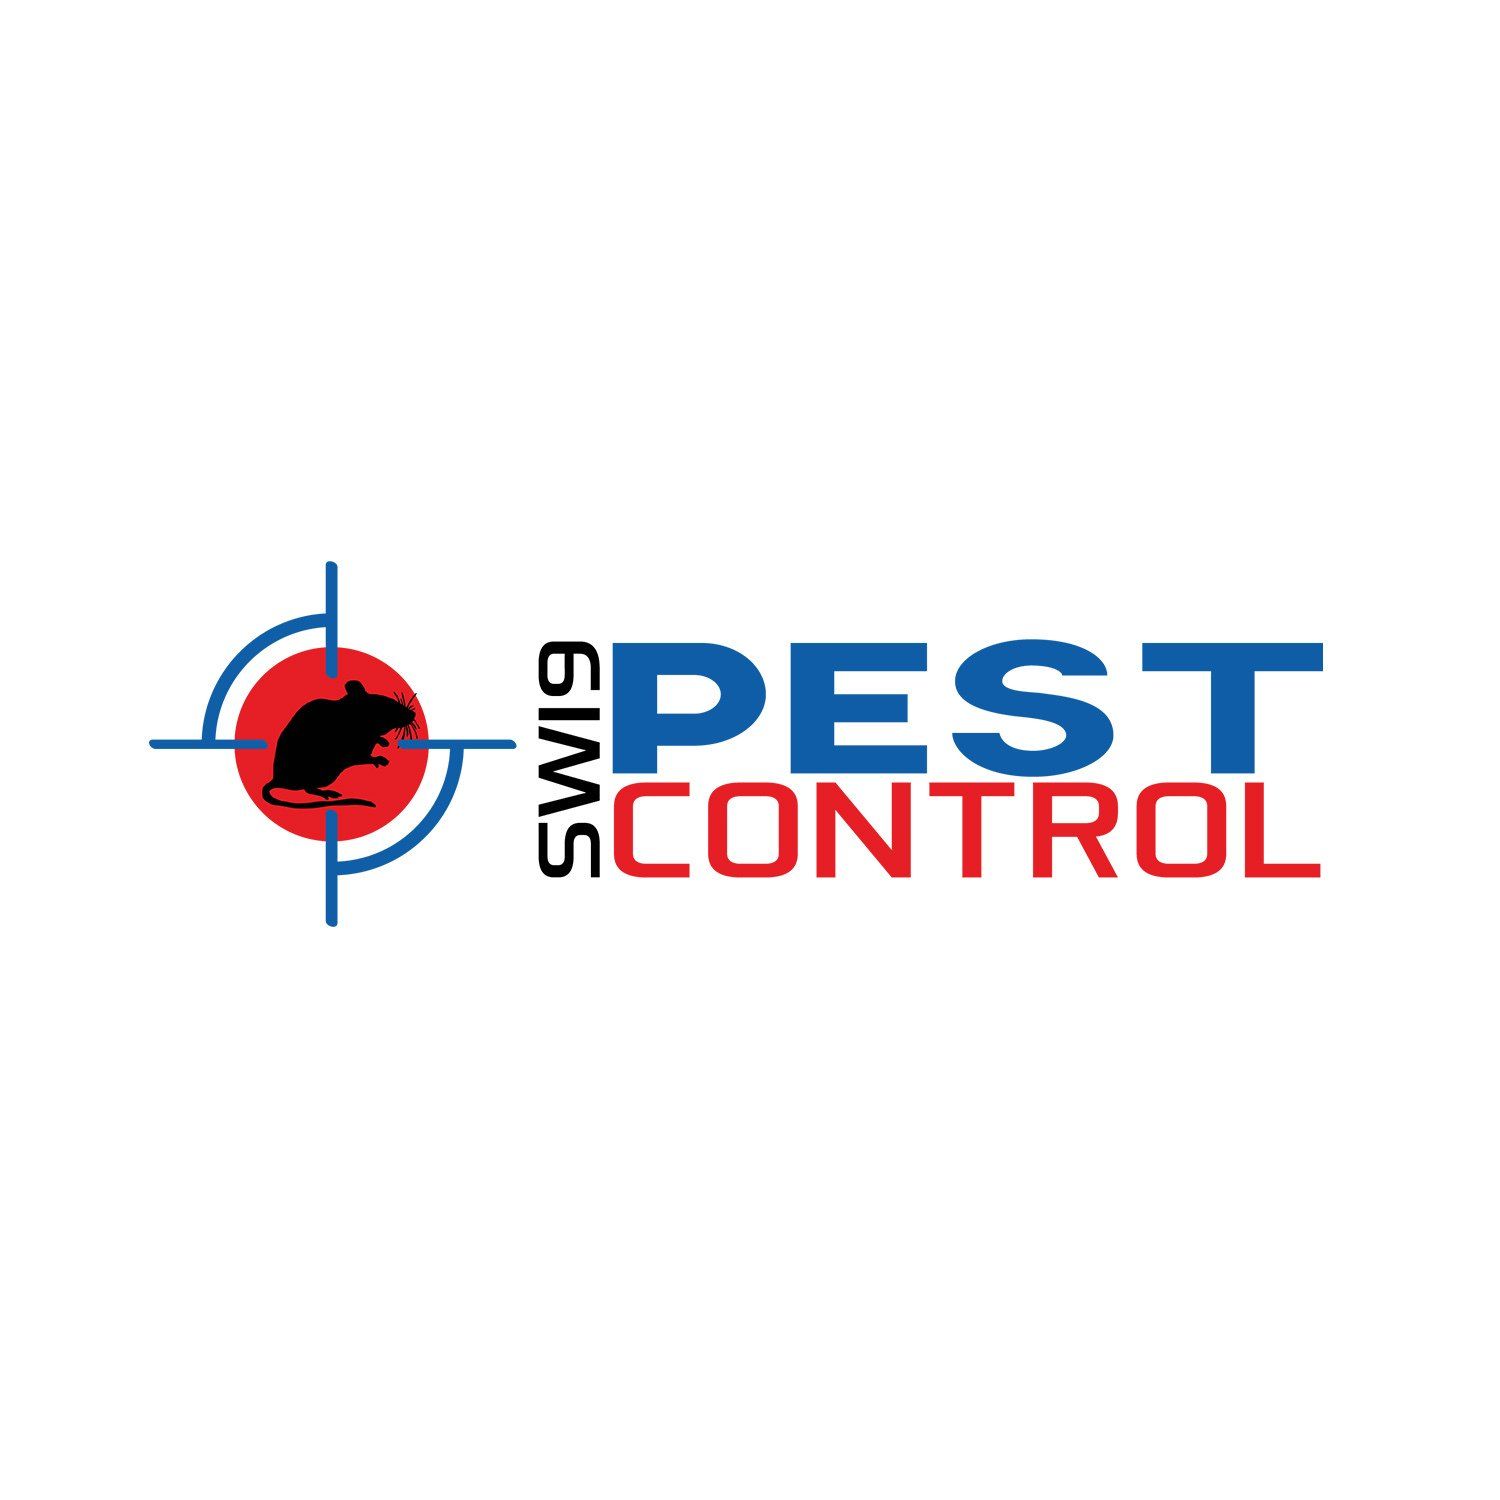 Pest Control in Wimbledon, Morden and Raynes Park